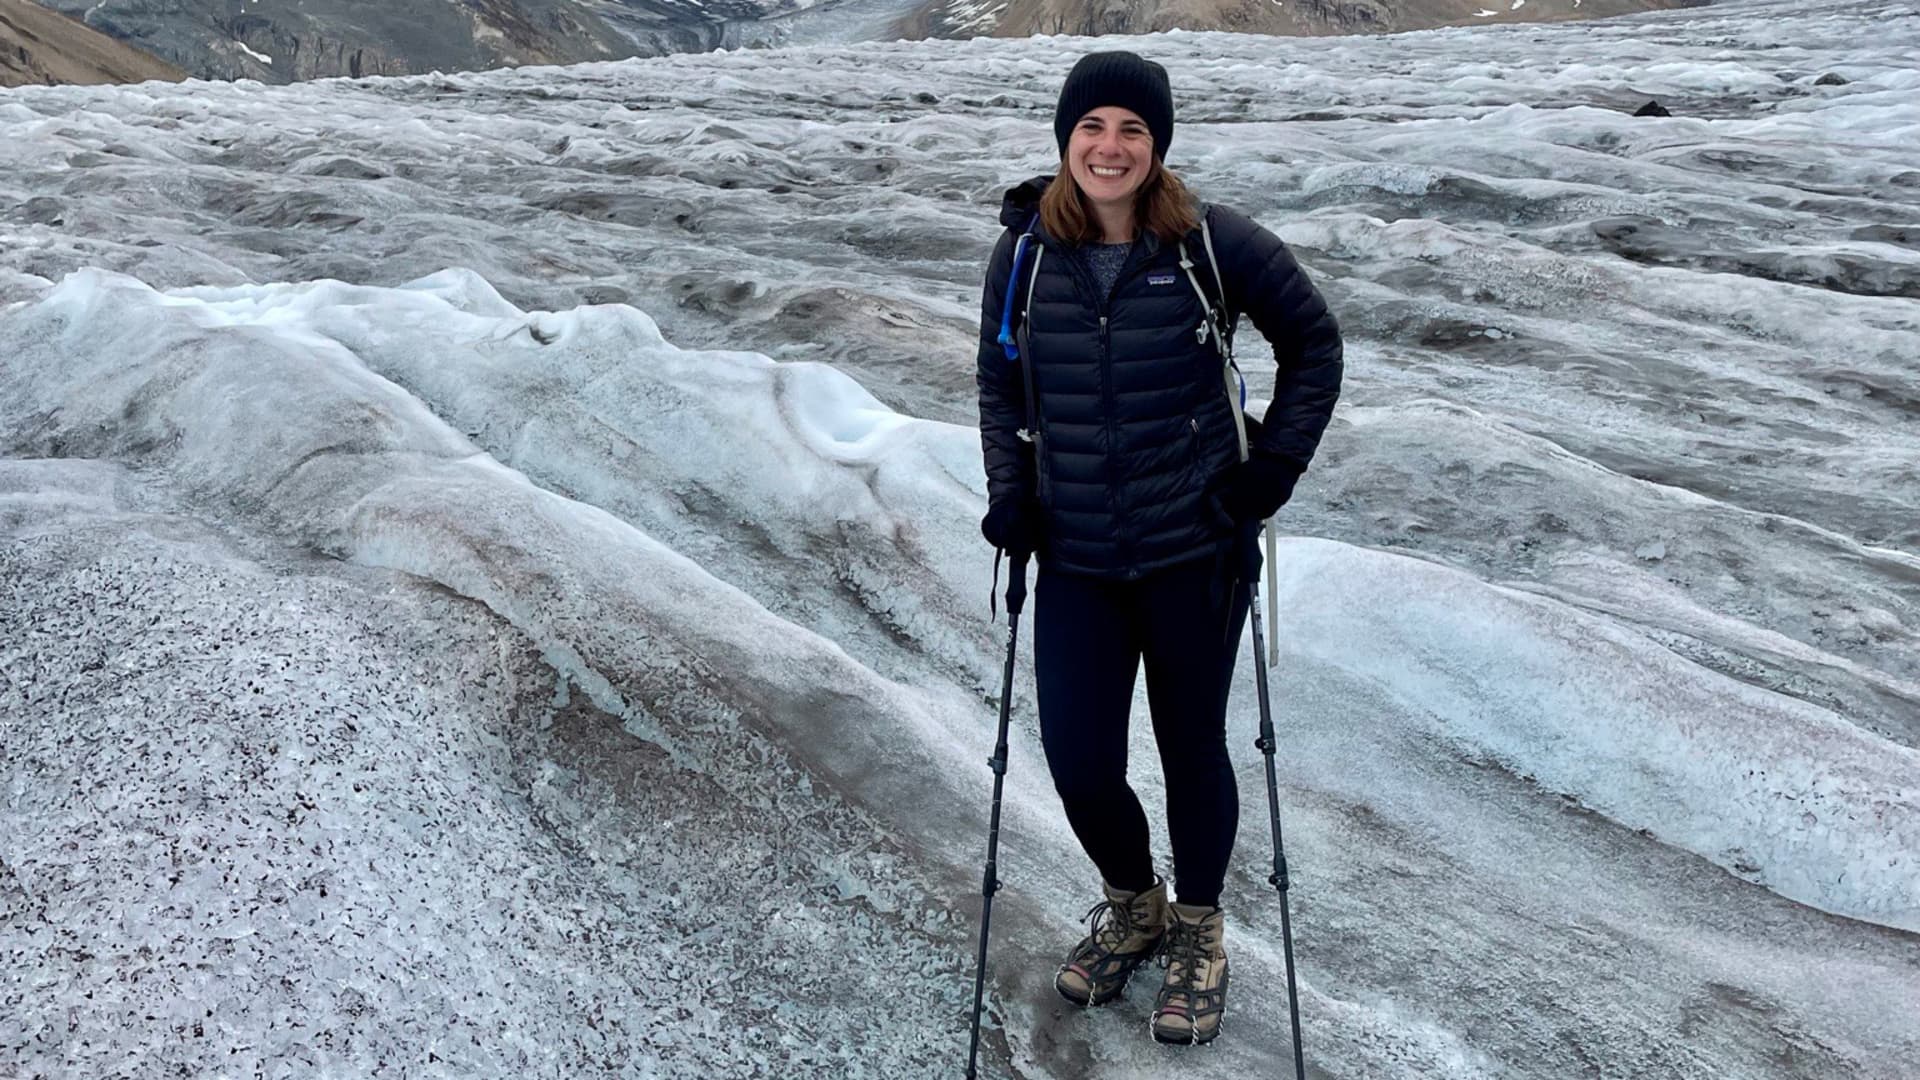 Allison Greenwald, senior product manager at The Alley Group, spent five weeks in Alaska while working a flexible schedule.